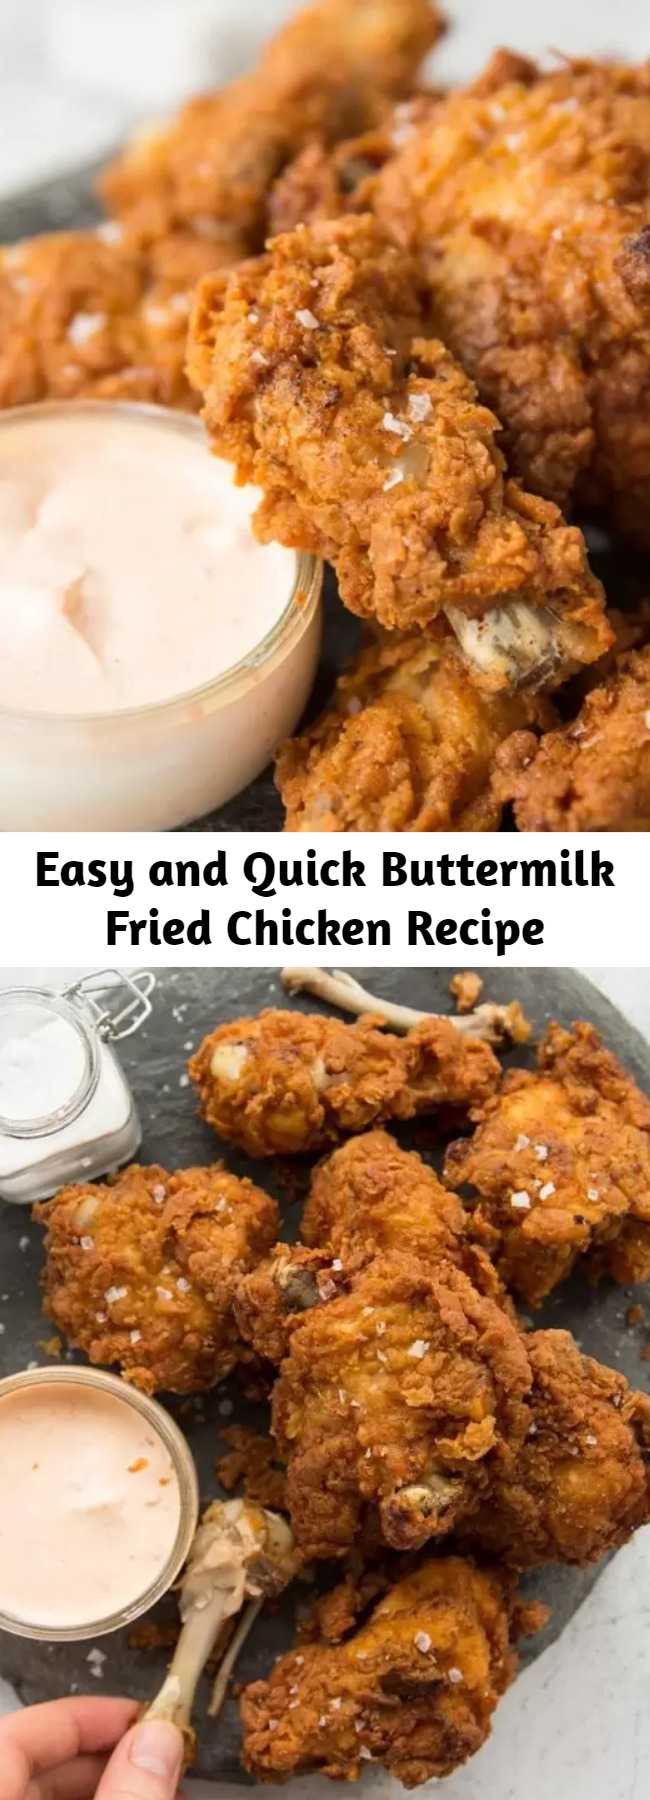 Easy and Quick Buttermilk Fried Chicken Recipe - This Buttermilk Fried Chicken recipe is packed with all the tips you need to make EXTRA crispy fried chicken. Once you give this a go, you won't have it any other way! #chicken #friedchicken #deepfriedchicken #buttermilk #buttermilkfriedchicken